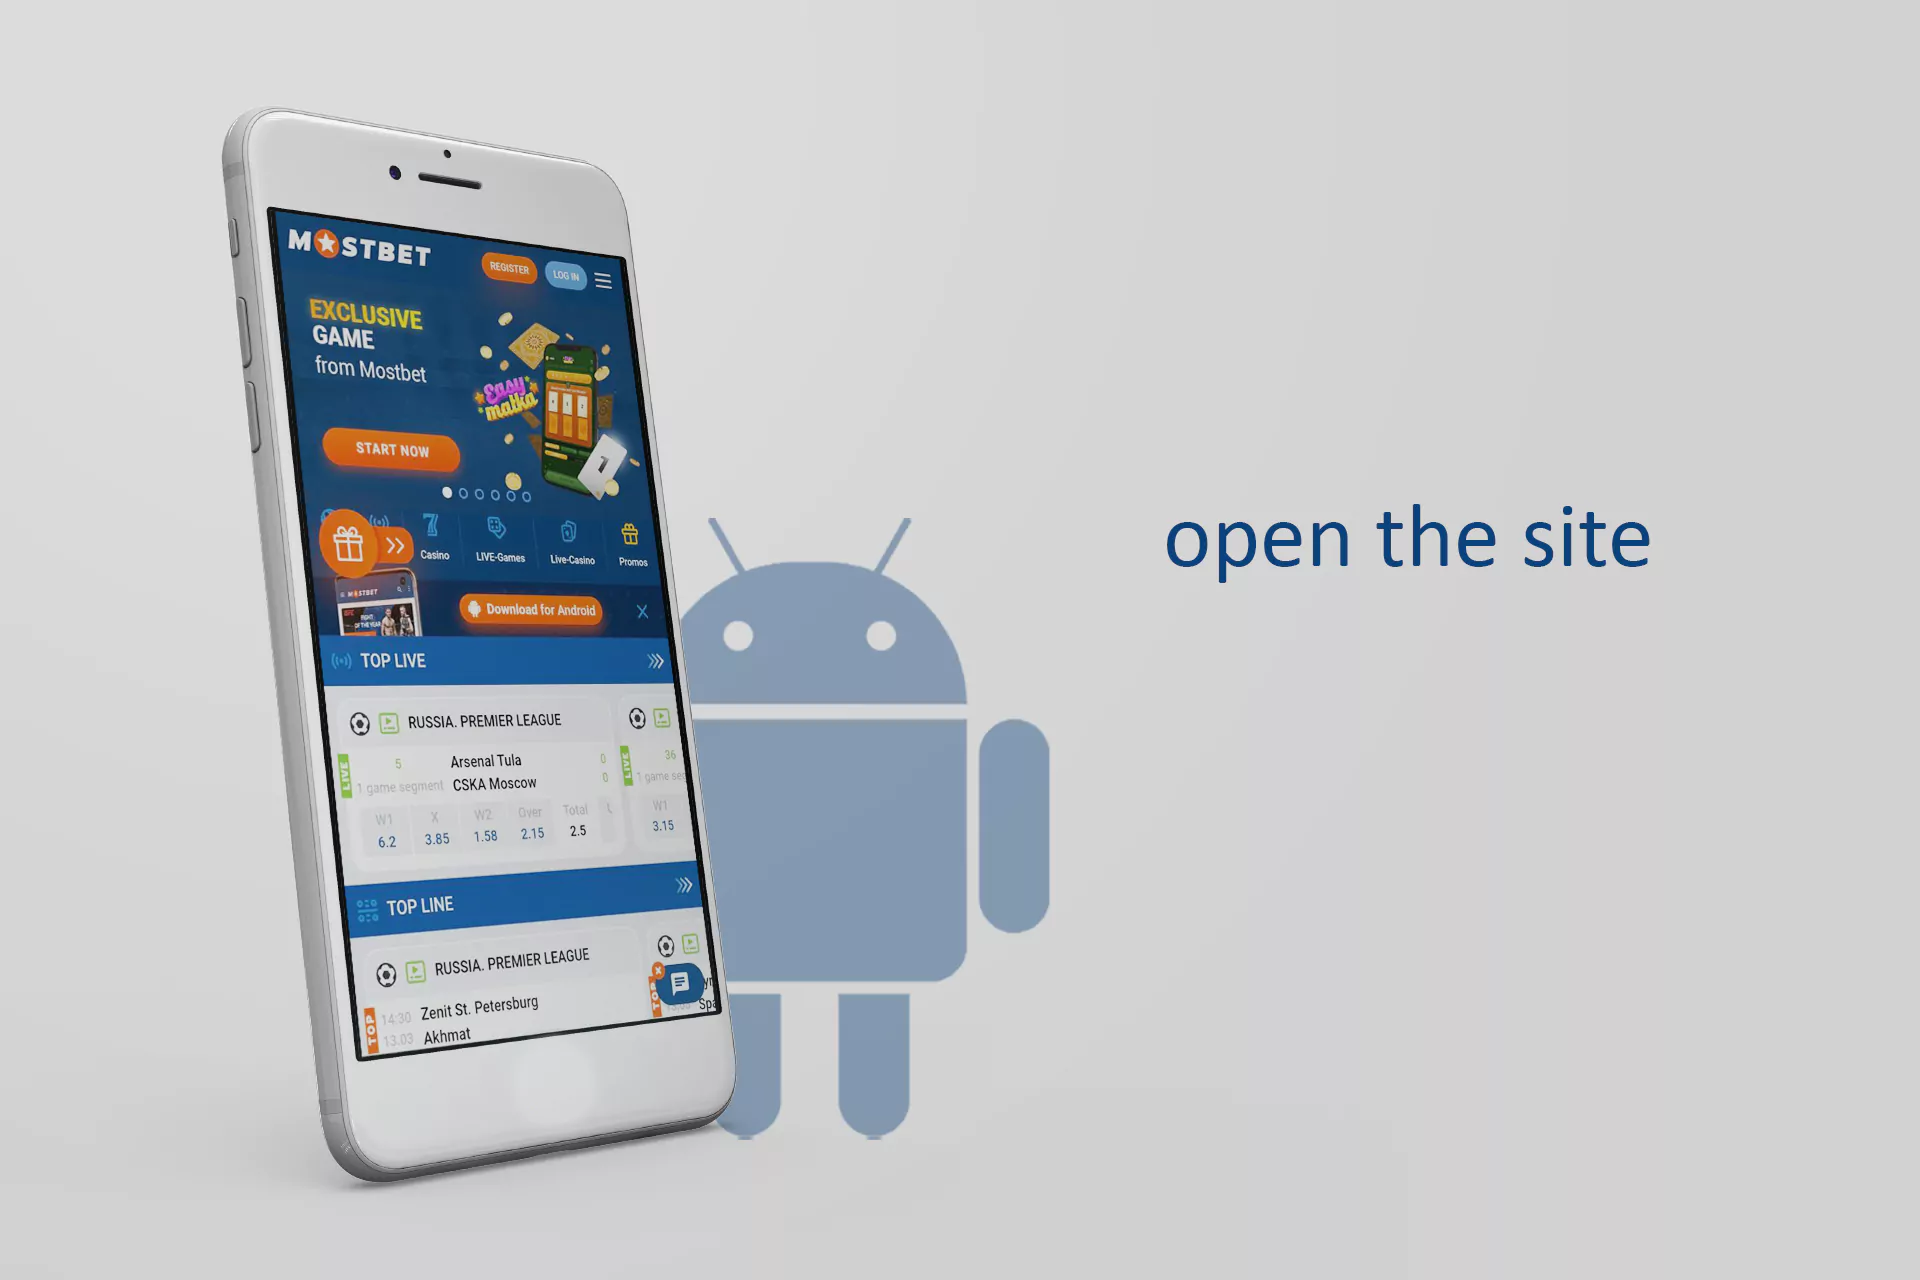 Open the mobile site in a browser on your phone.